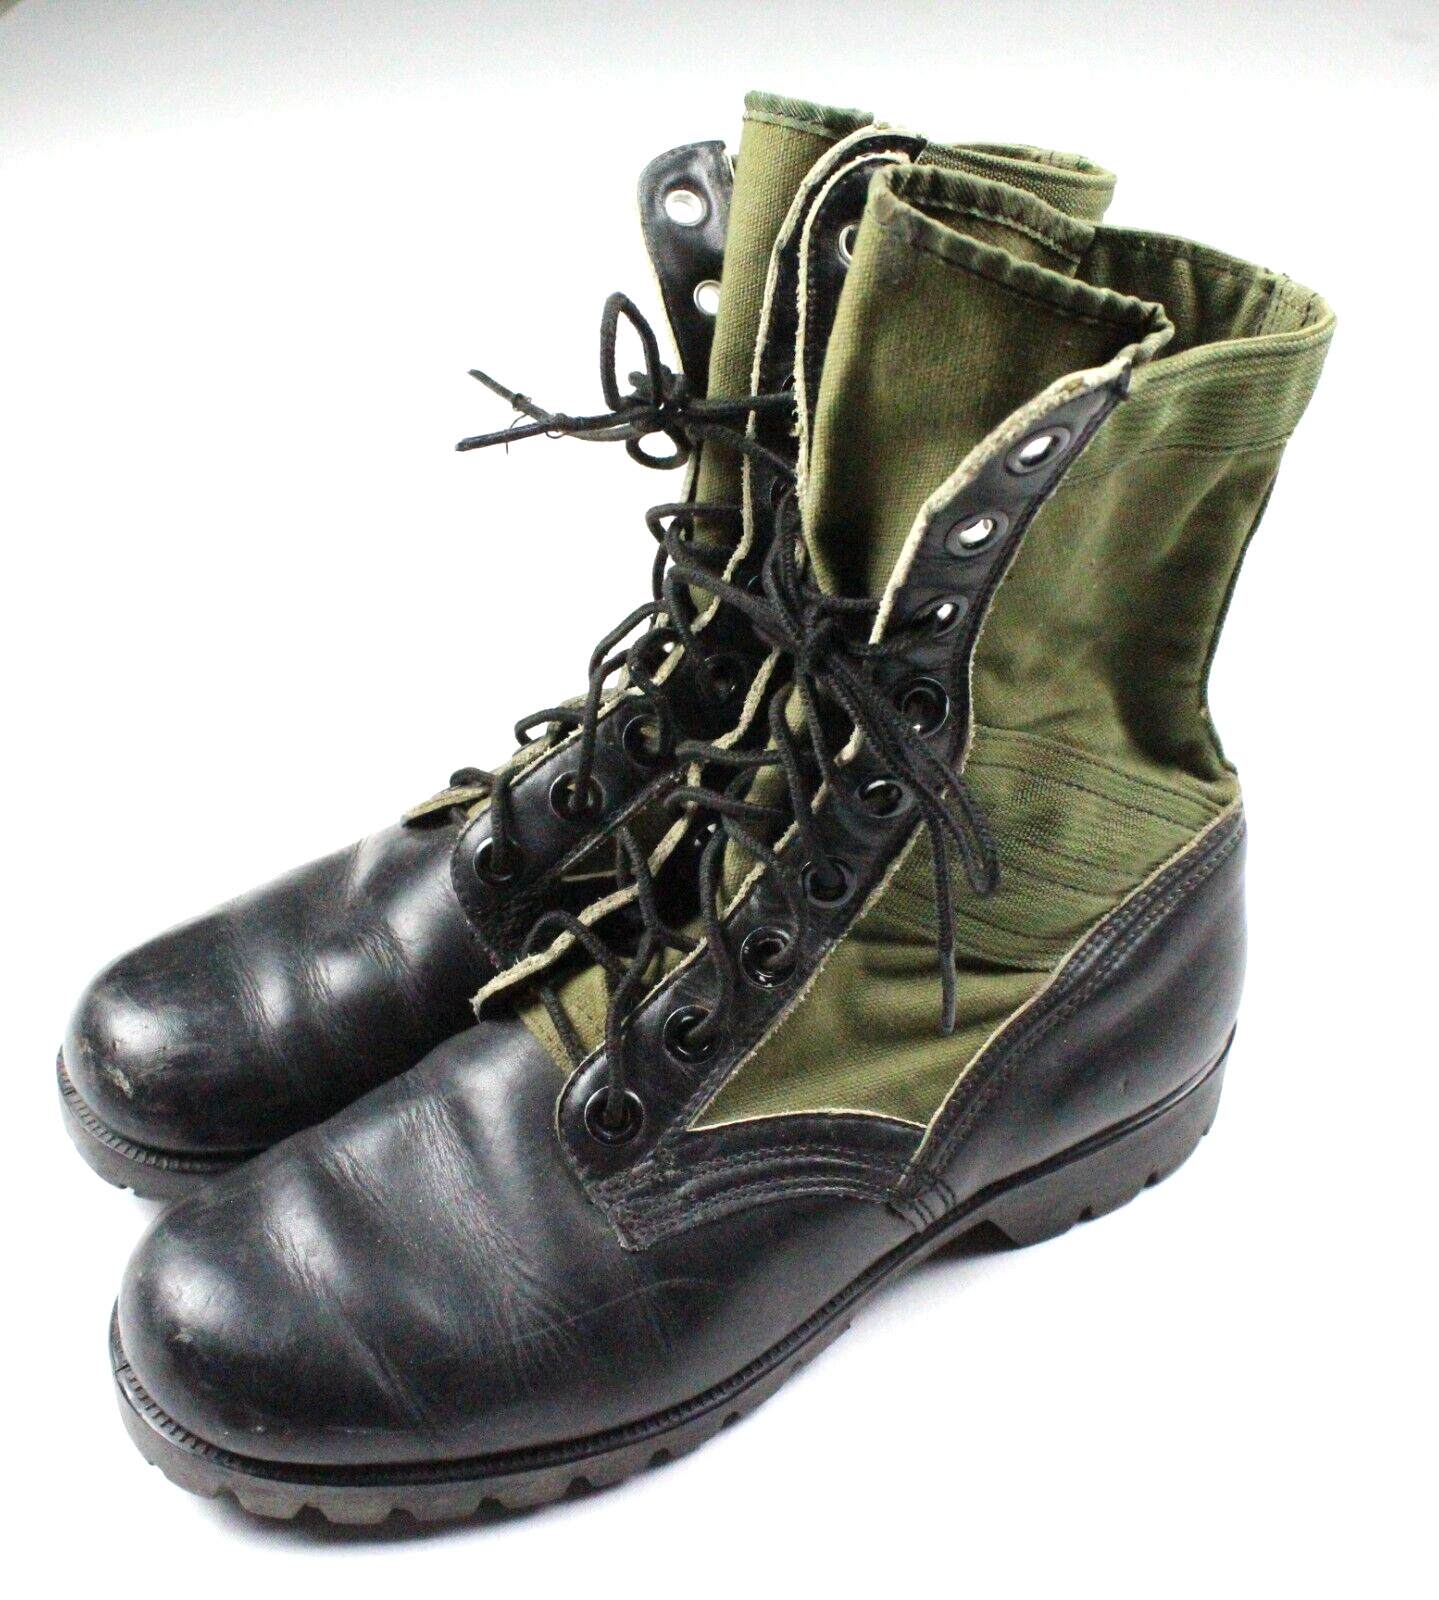 Vintage 1966 Vietnam Army Military RO-Search Tropical Combat Jungle Boots 8 Reg